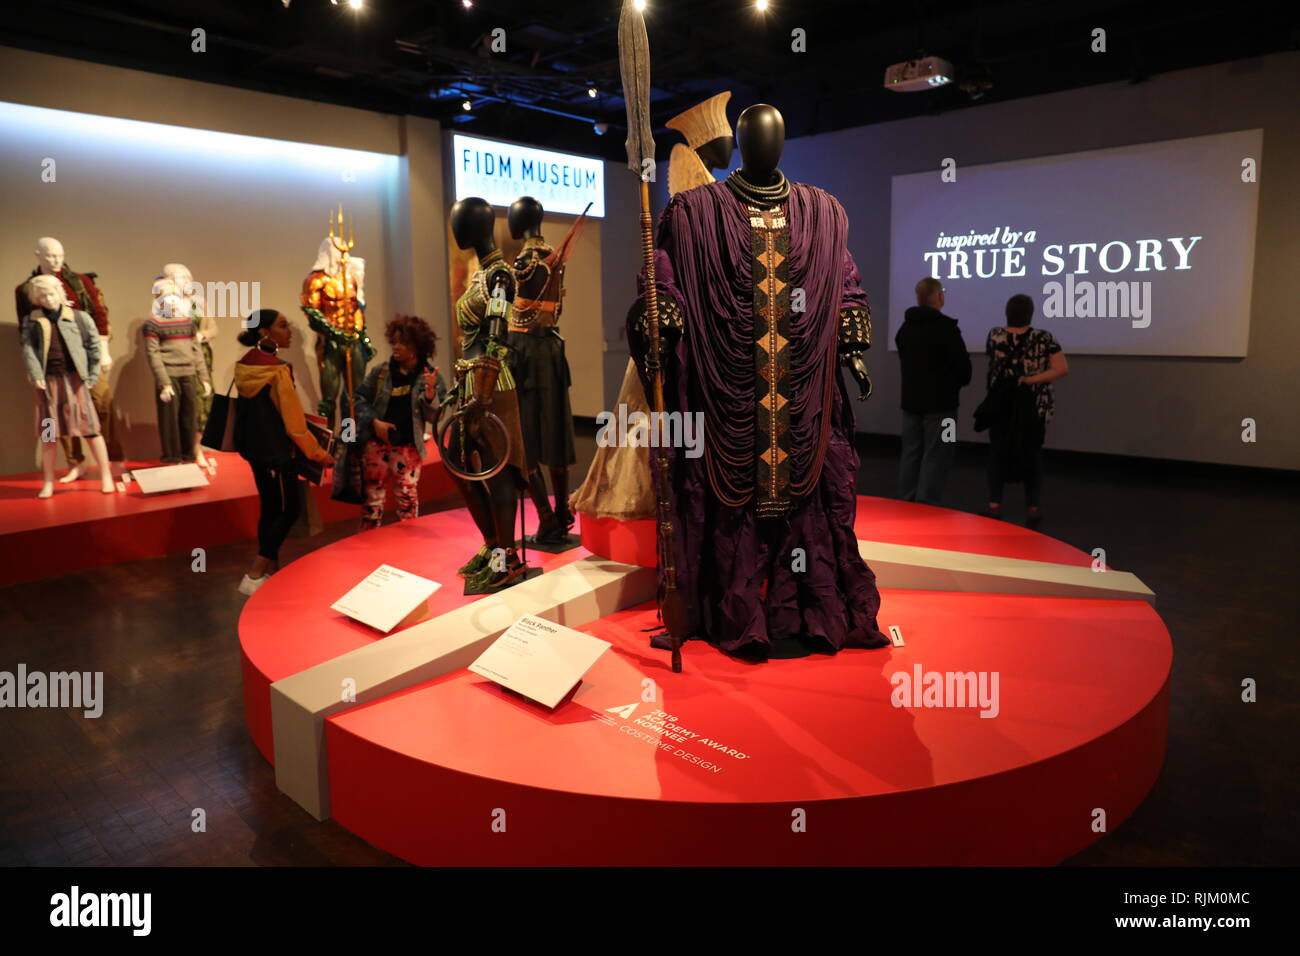 Los Angeles, CA / USA - 2/5/2019: Costumes from 2019 Oscar-nominated movies on display at FIDM/Fashion Institute of Design & Merchandising museum. Stock Photo